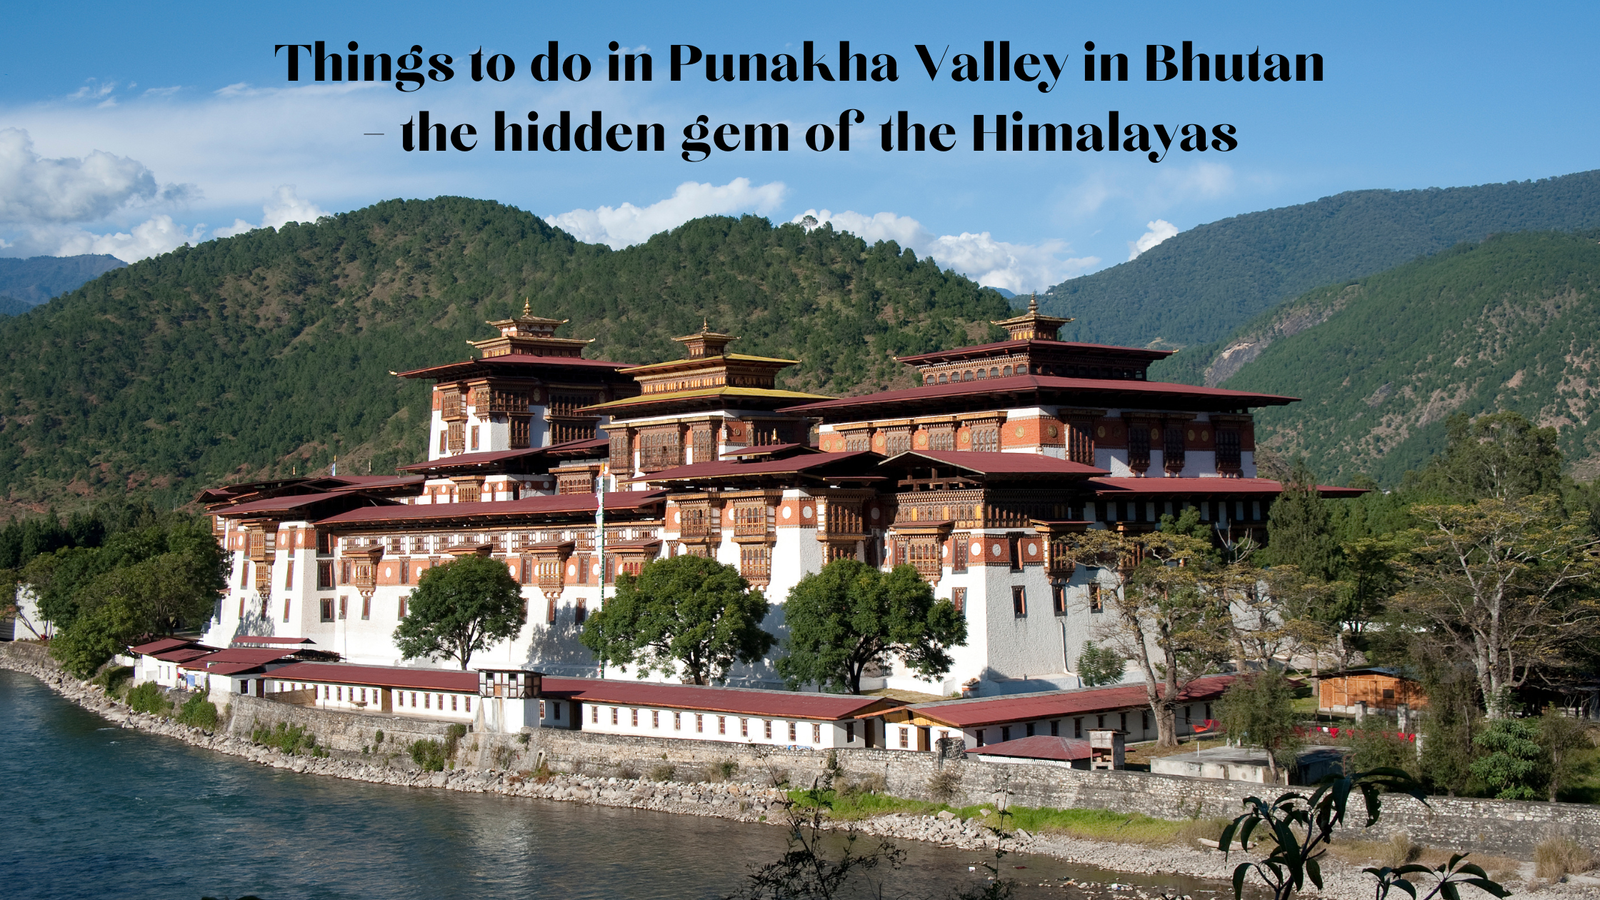 Things to do in Punakha Valley in Bhutan – the hidden gem of the Himalayas